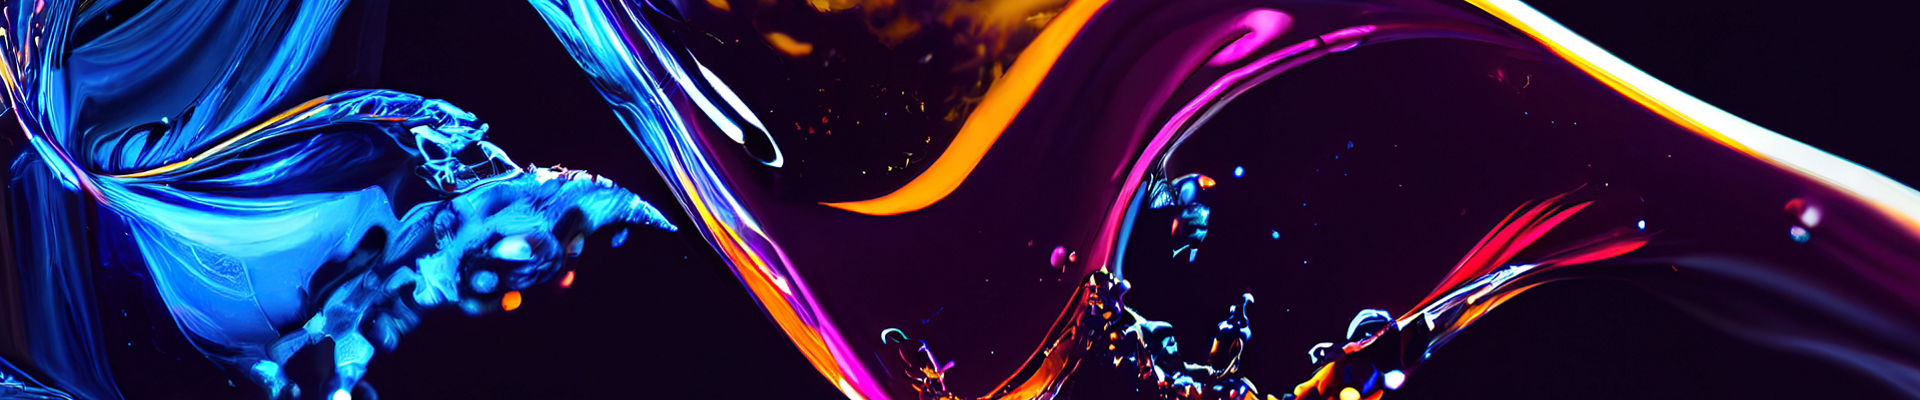 abstract image of colorful liquid in motion